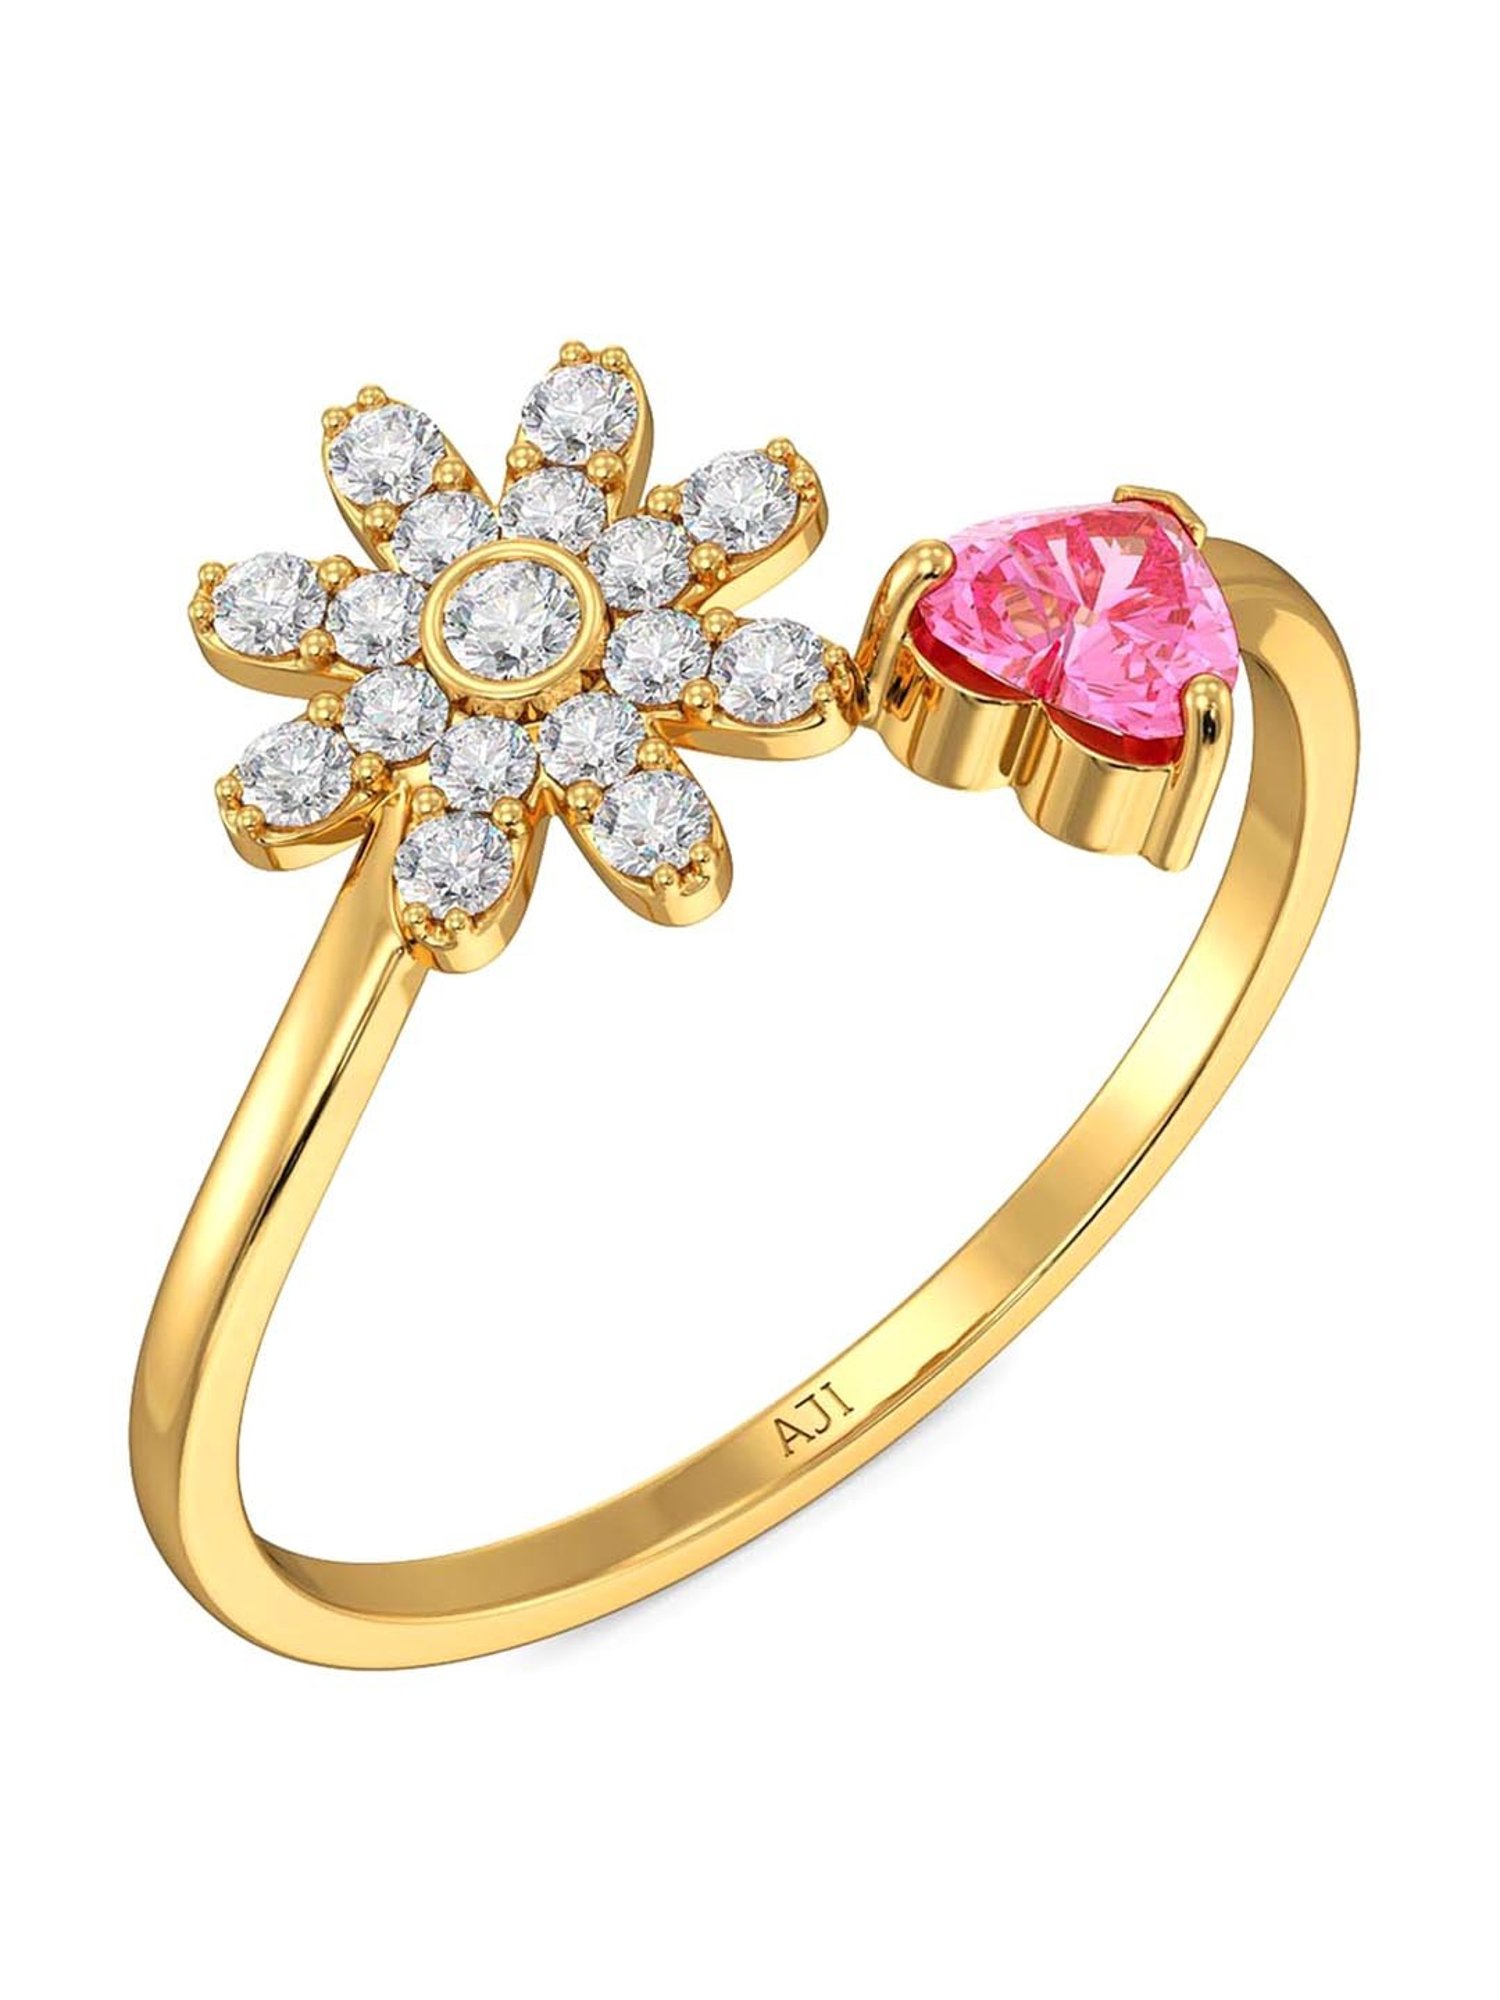 Smart Gold Ring For Girl - Buy Gold Rings For Women/Girl Online At Best  Designs, Best Prices In India | 49jewels.com